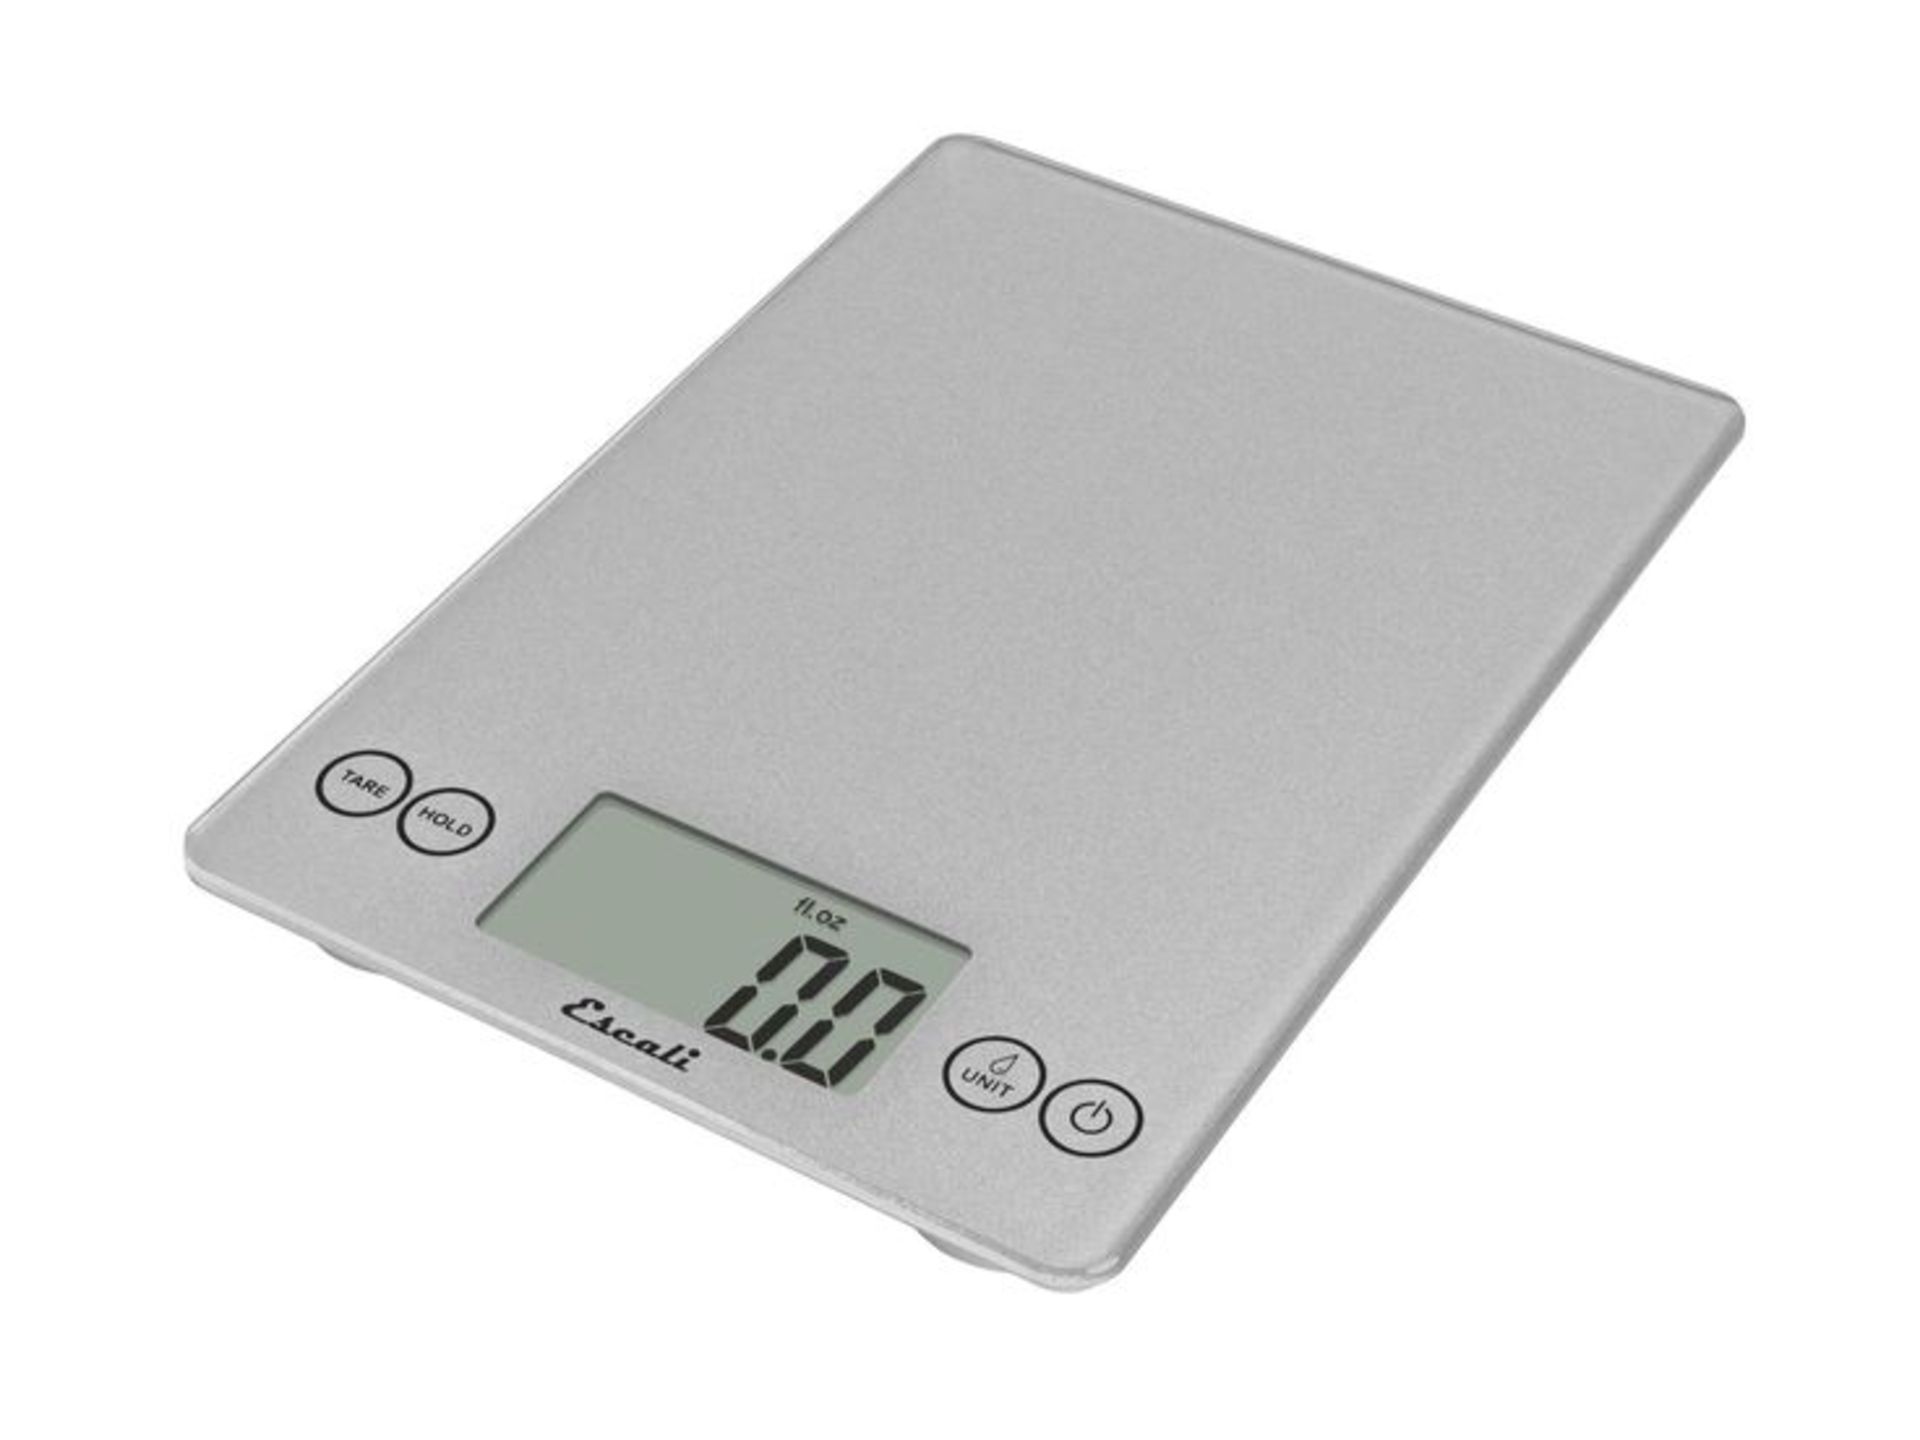 V Brand New Kitchen Collection Digital Kitchen Scales-Large LCD Display-Stainless Steel Weighing - Image 3 of 4